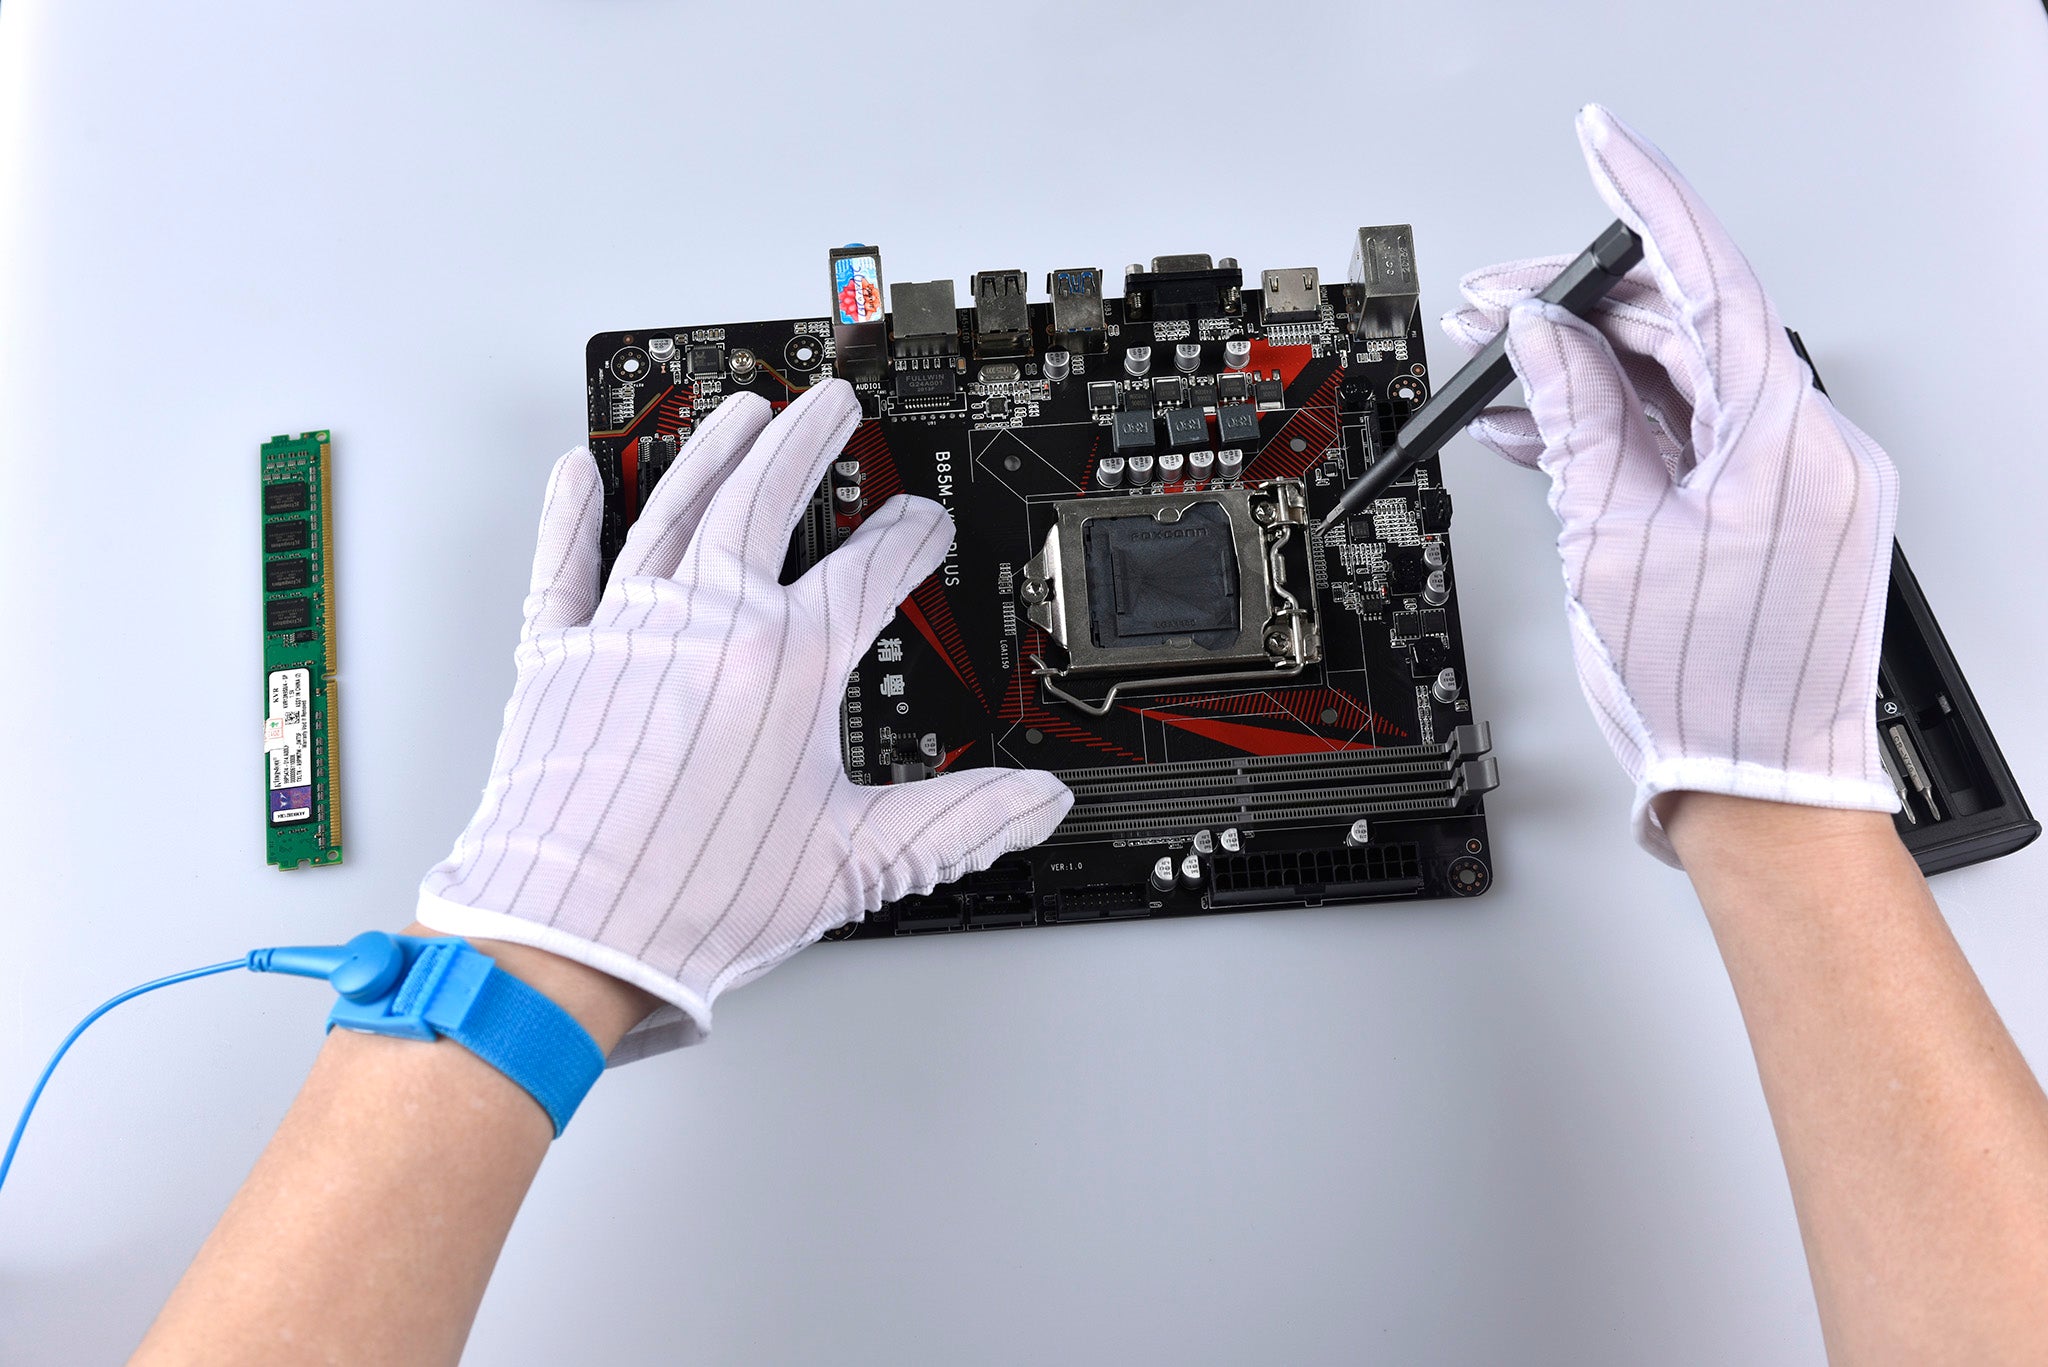 Electrostatic gloves are suitable for PC computer repair and assembly